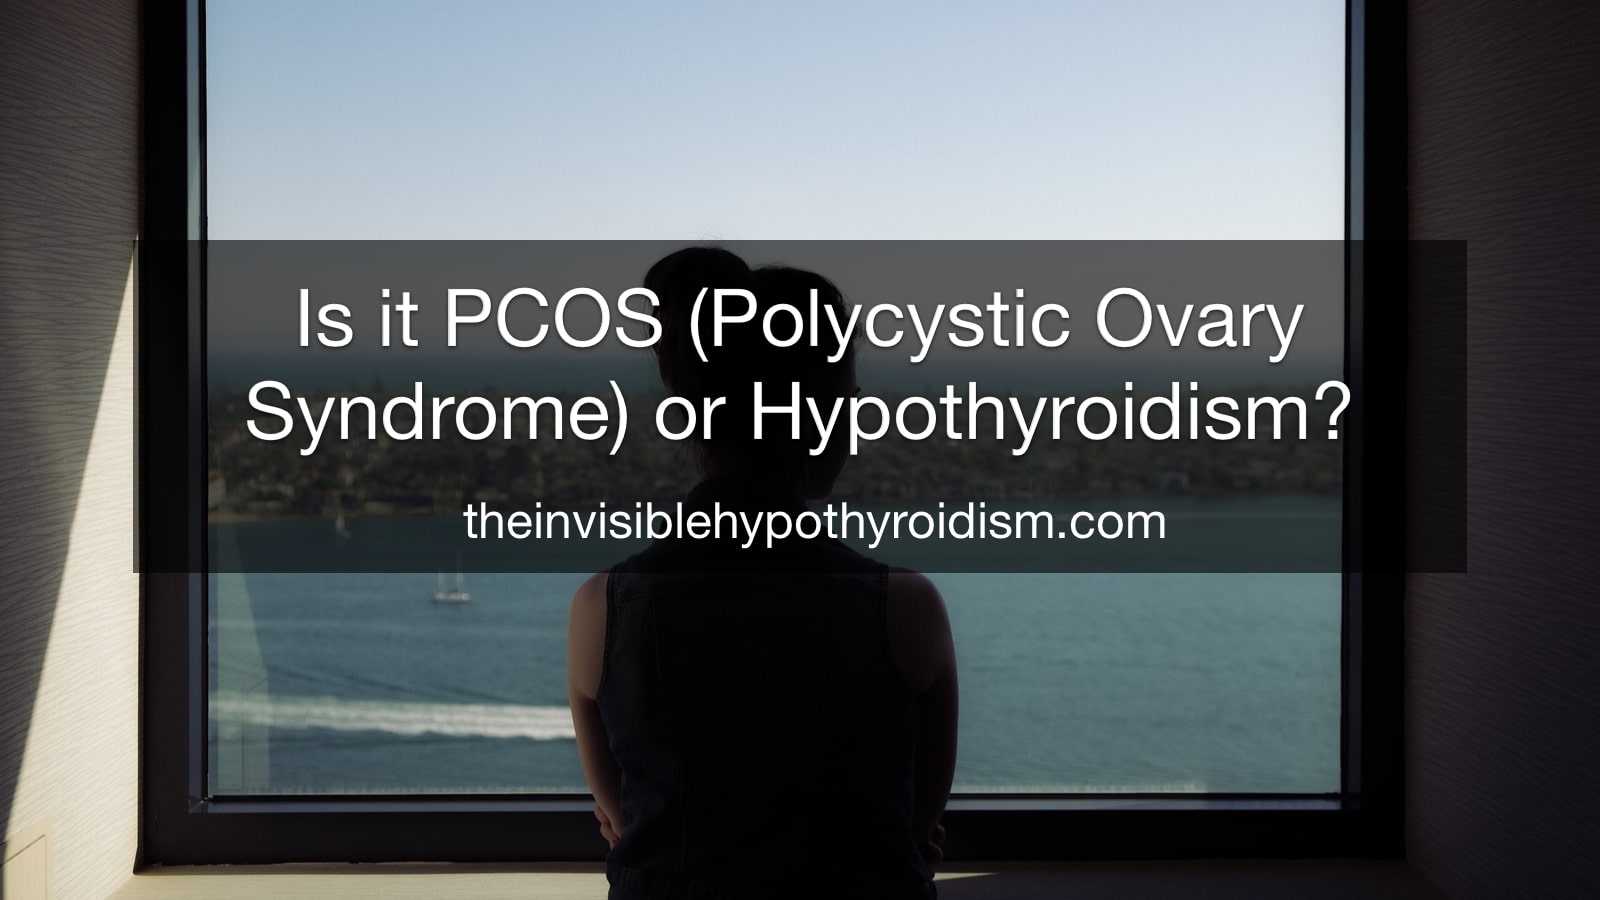 Is it PCOS (Polycystic Ovary Syndrome) or Hypothyroidism?